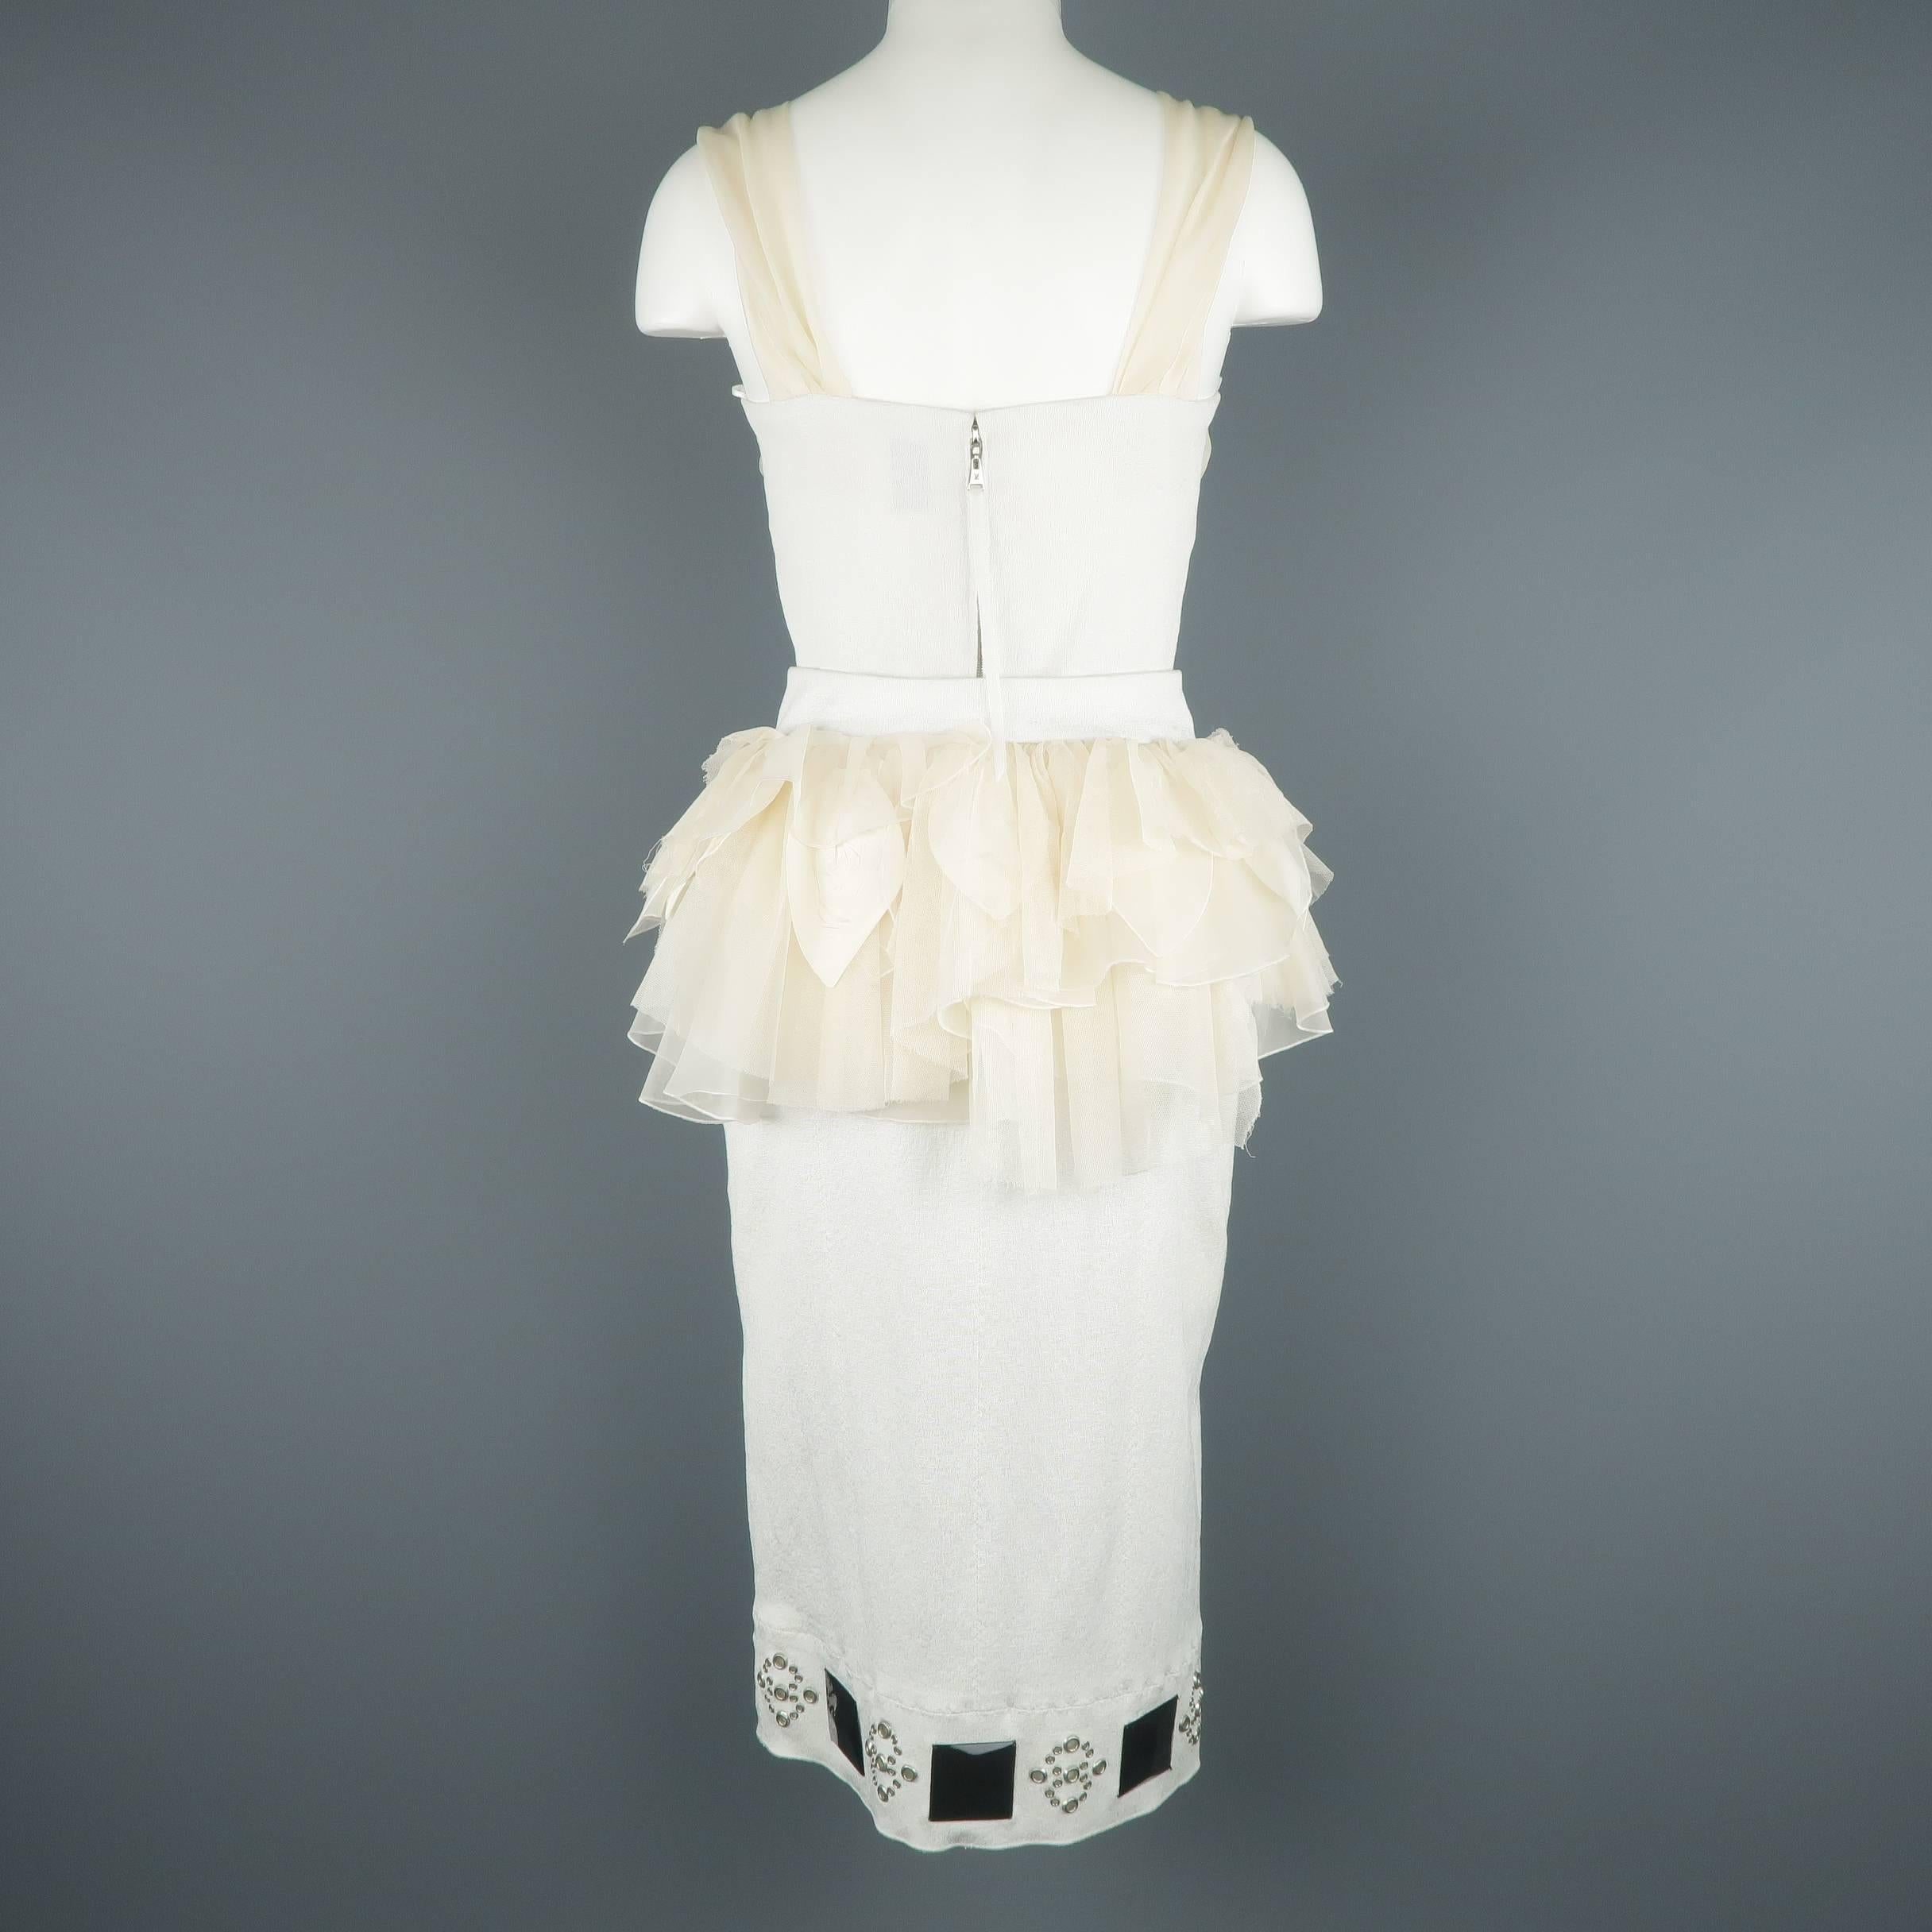 Louis Vuitton White and Beige Ruched Bust Ruffled Belt Cocktail Dress 4